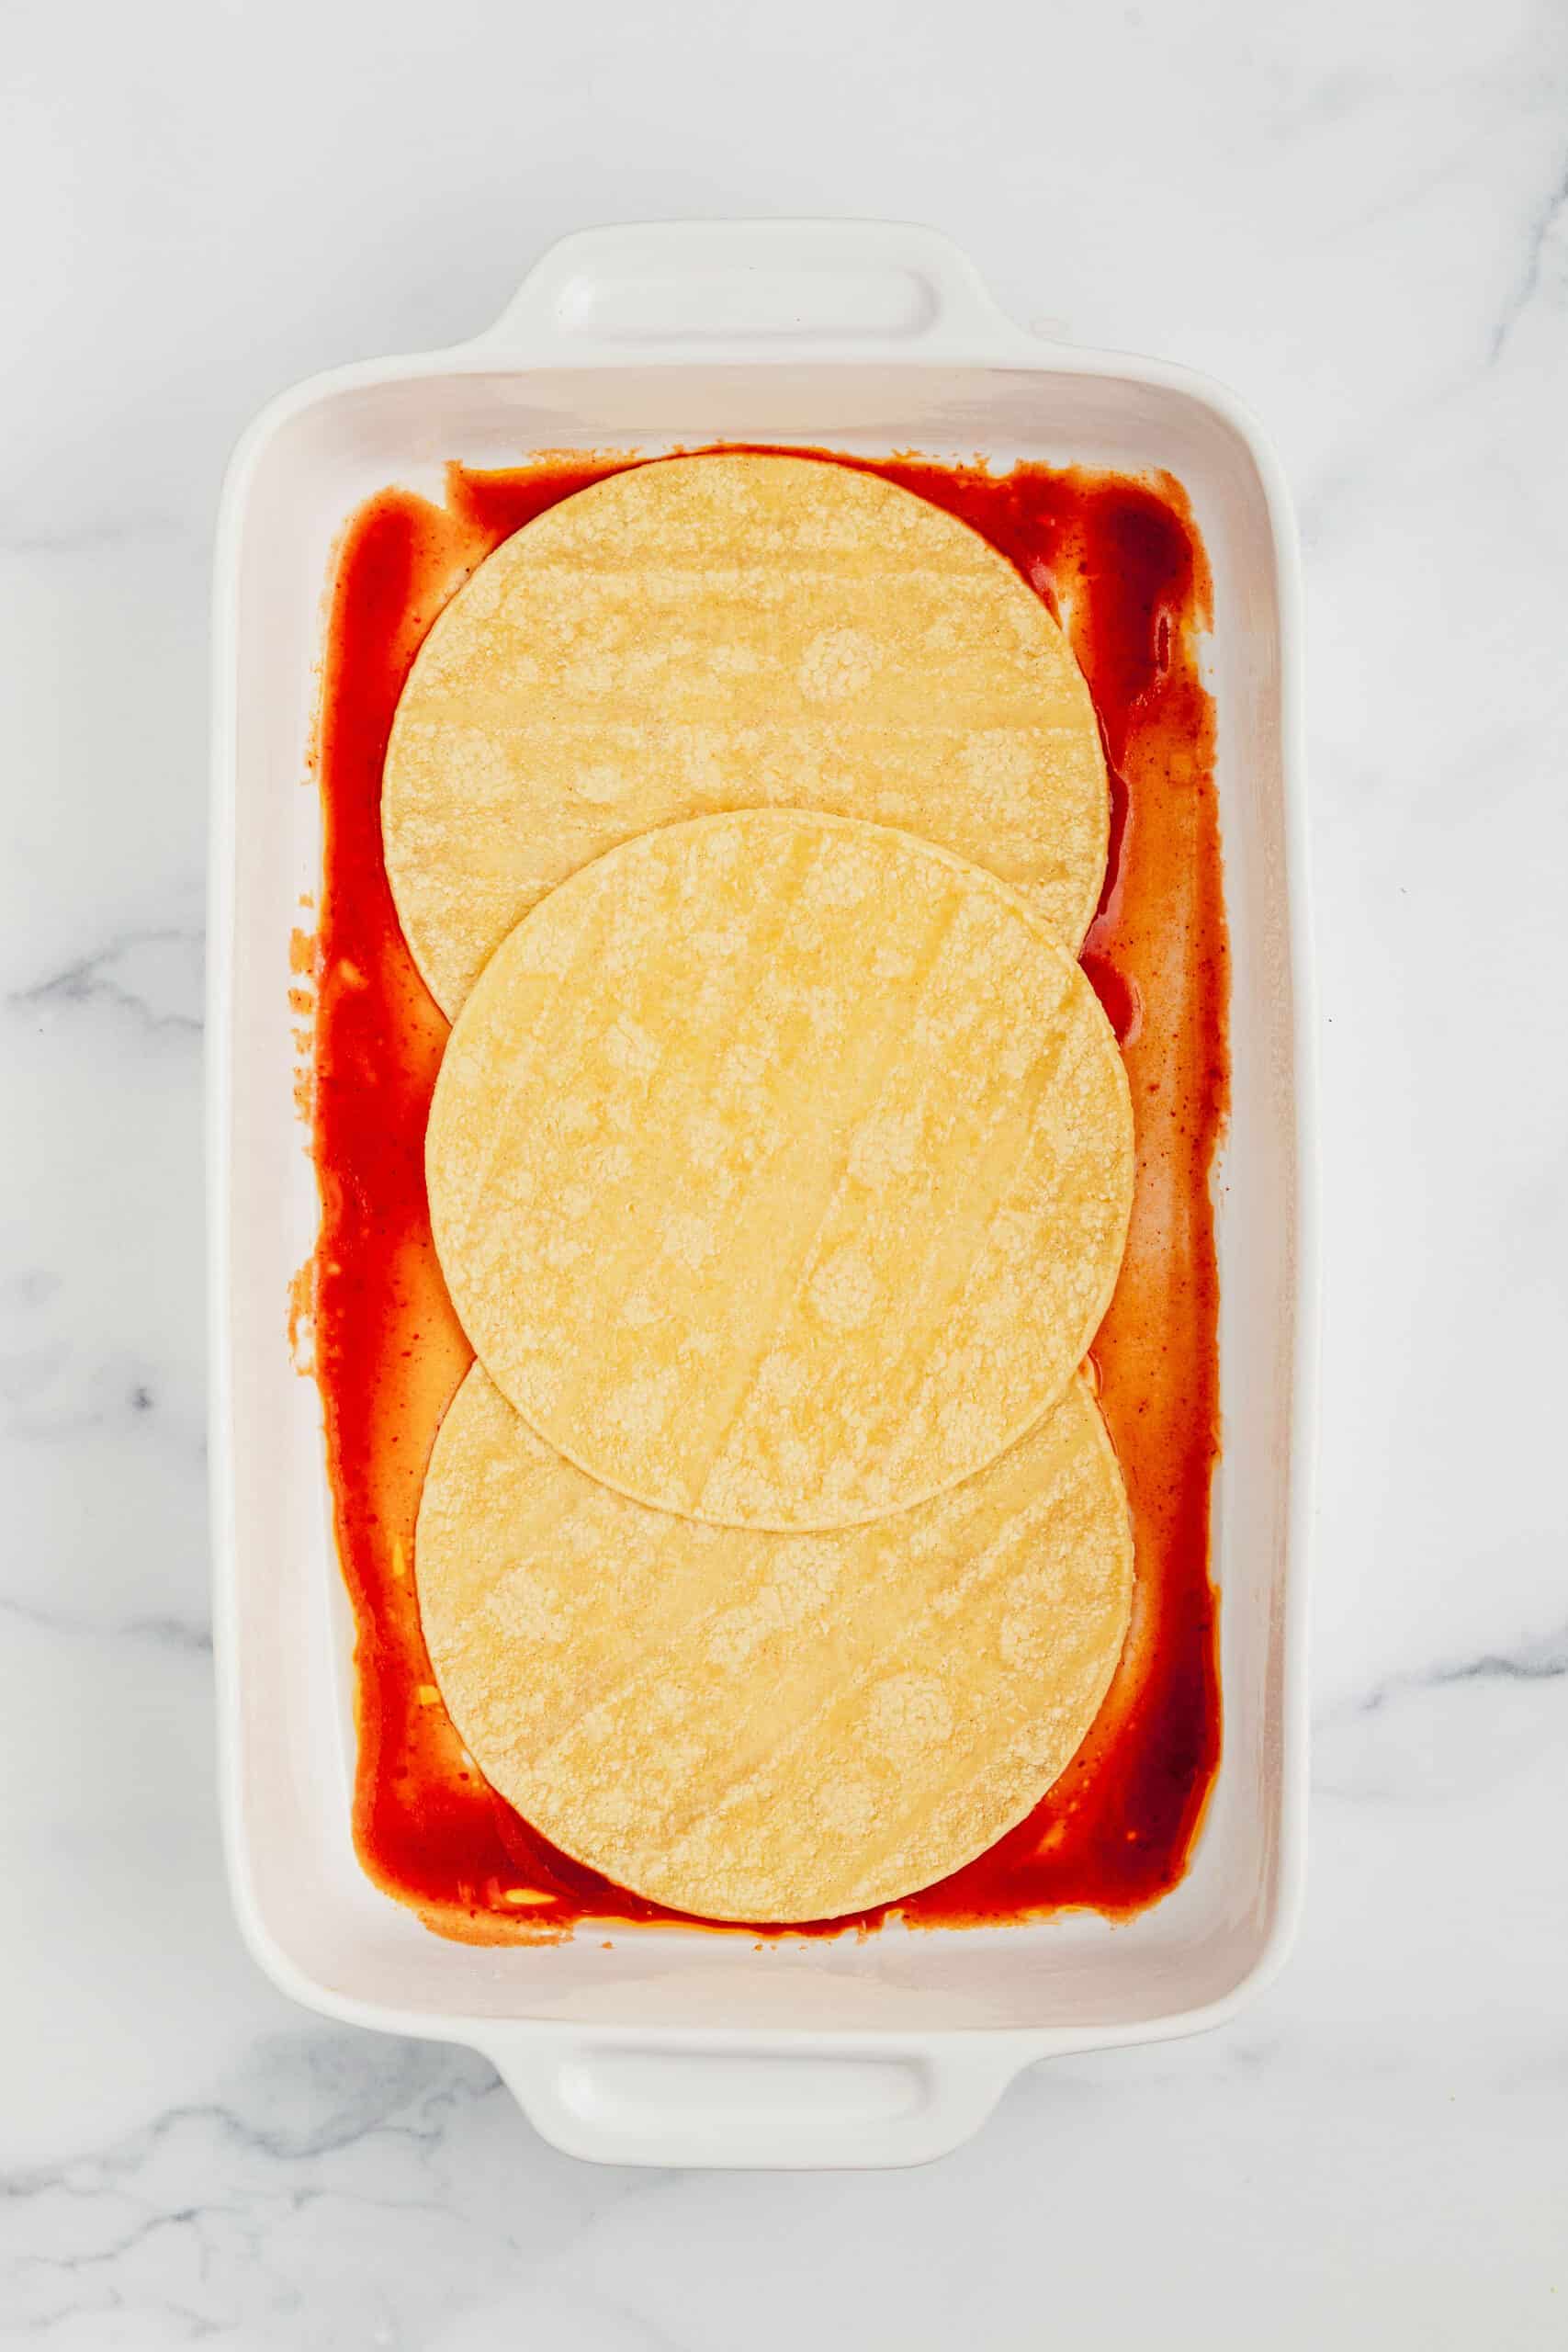 Enchilada sauce with tortillas in a casserole dish.